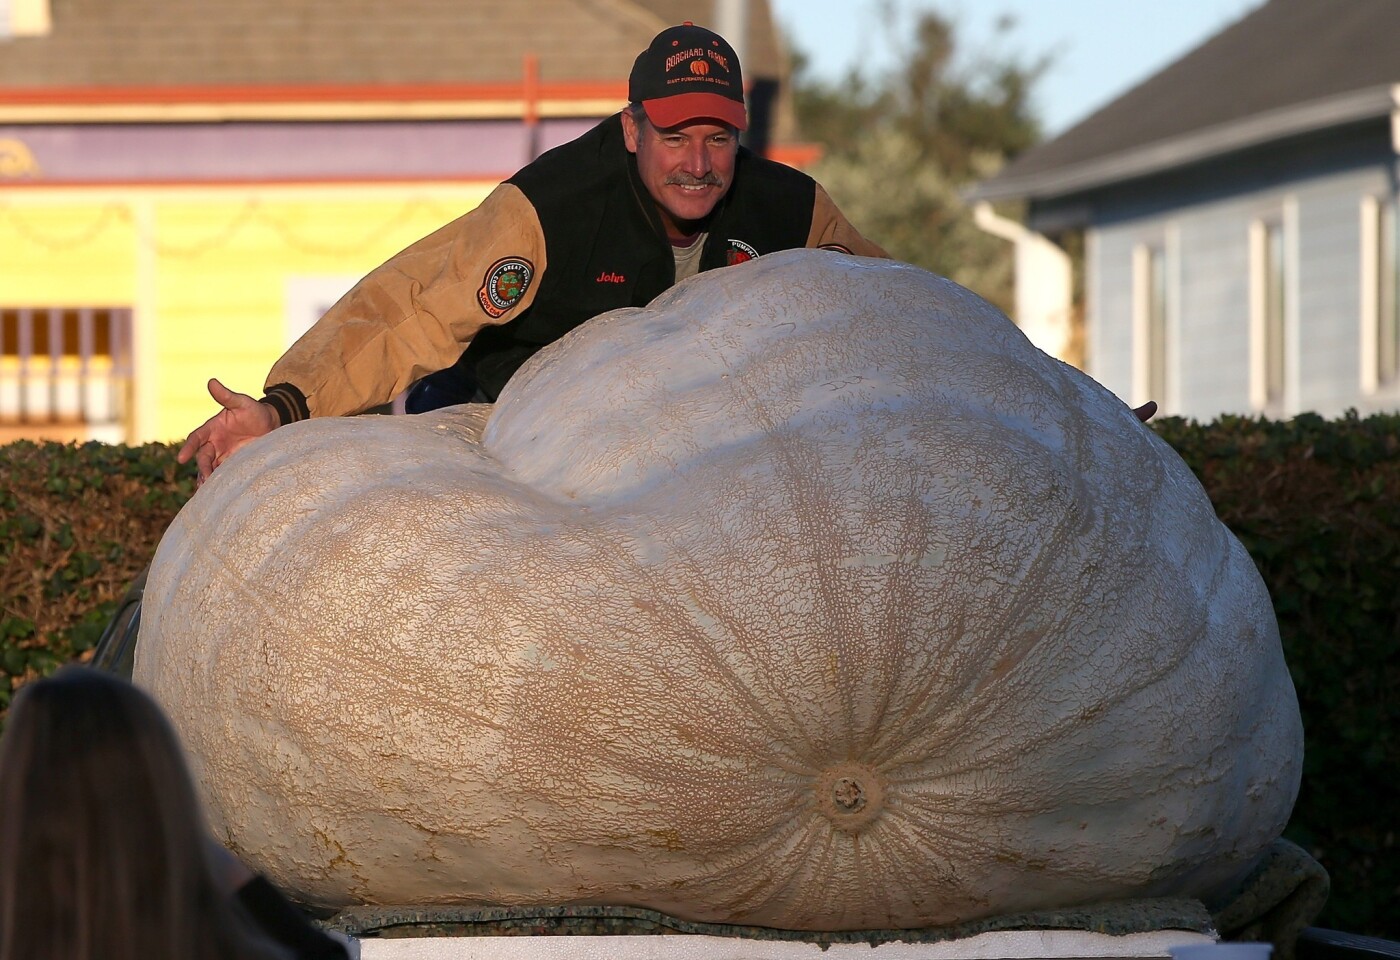 World's heaviest pumpkin, grown in Napa Valley, weighs more than 2,000 pounds Los Angeles Times